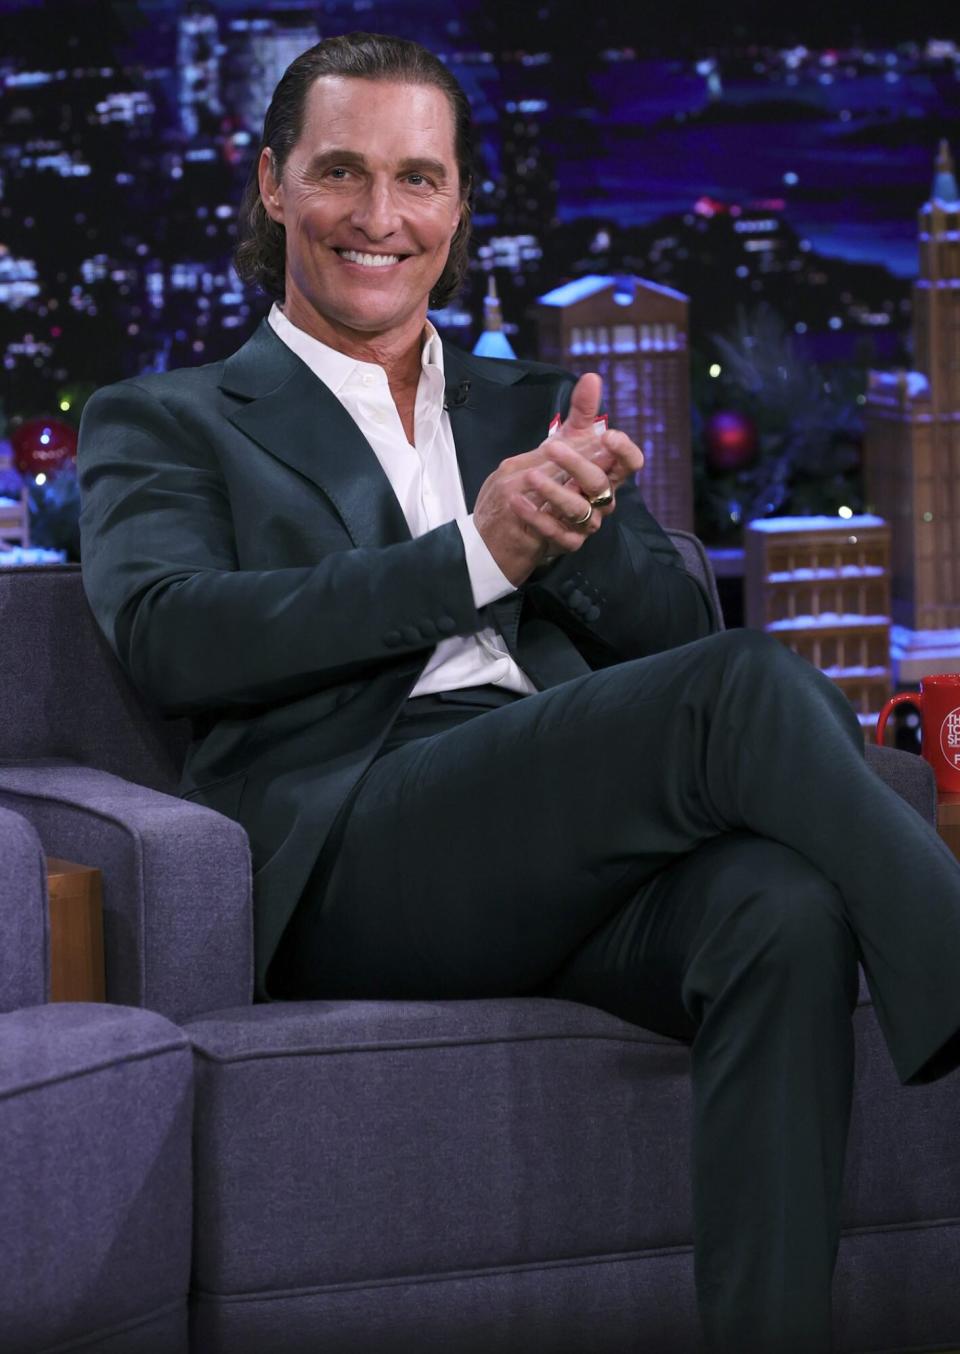 Matthew McConaughey during an interview with host Jimmy Fallon